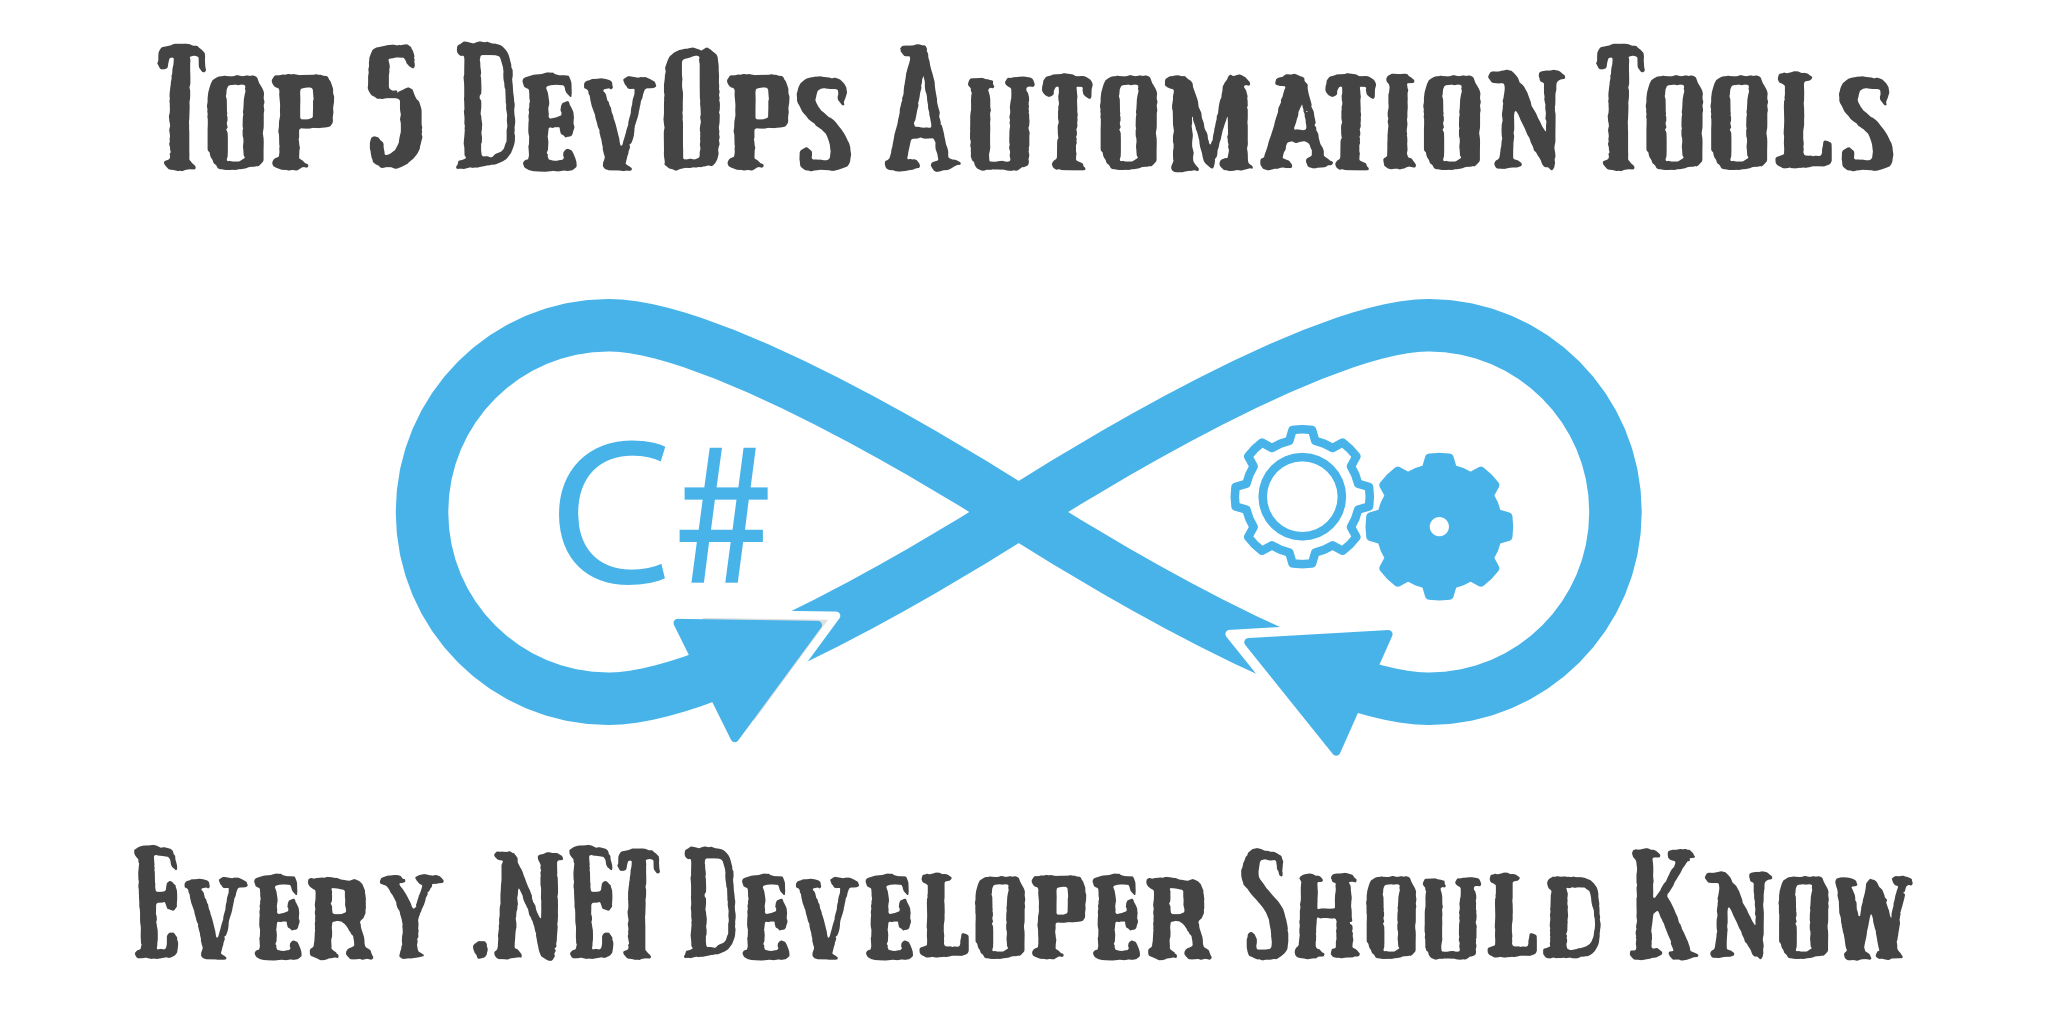 The Top 5 DevOps Automation Tools .NET Developers Should Know